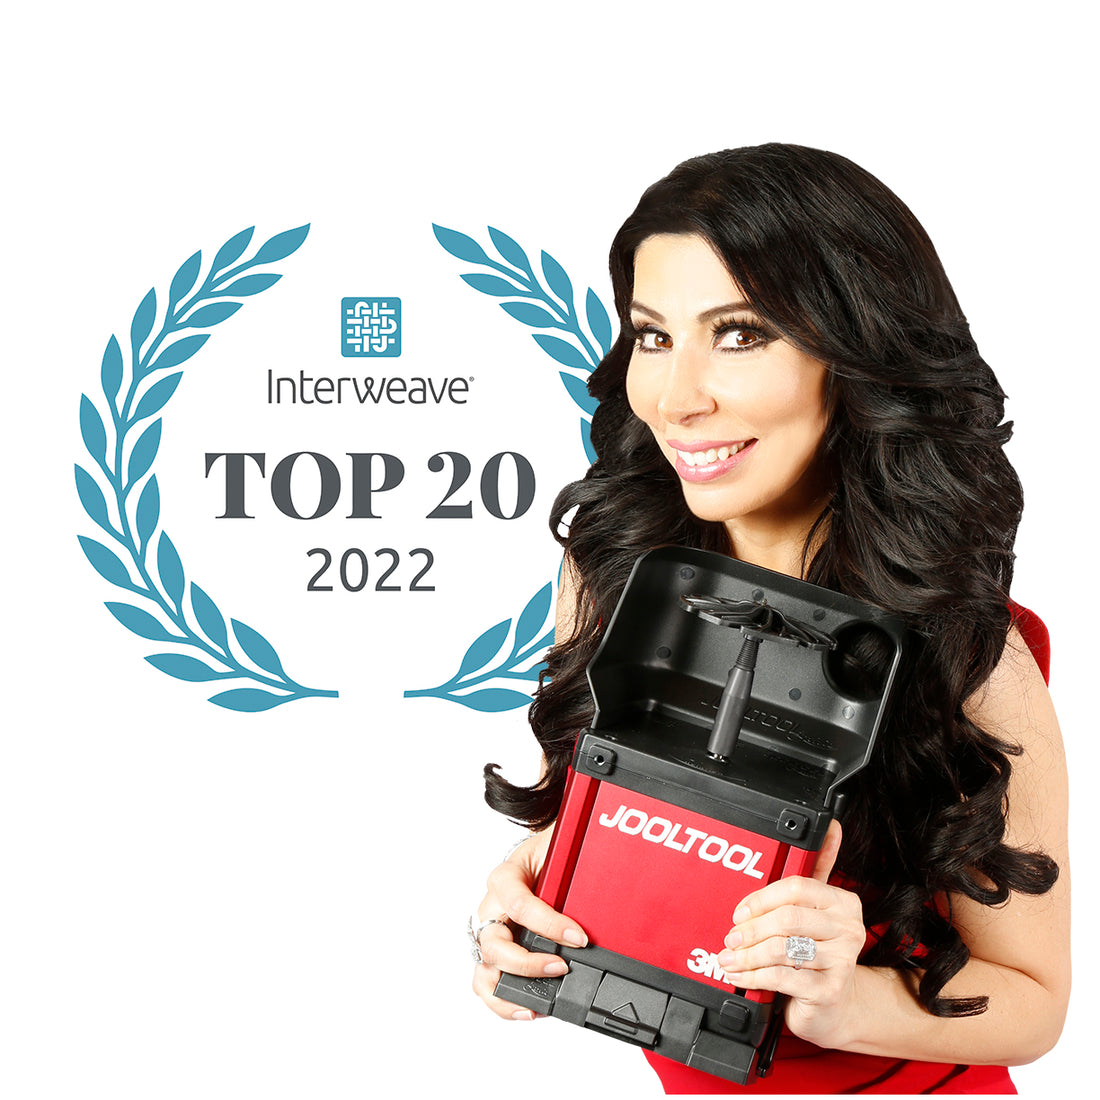 Anie and the JOOLTOOL named Interweave Top 20 for 2022